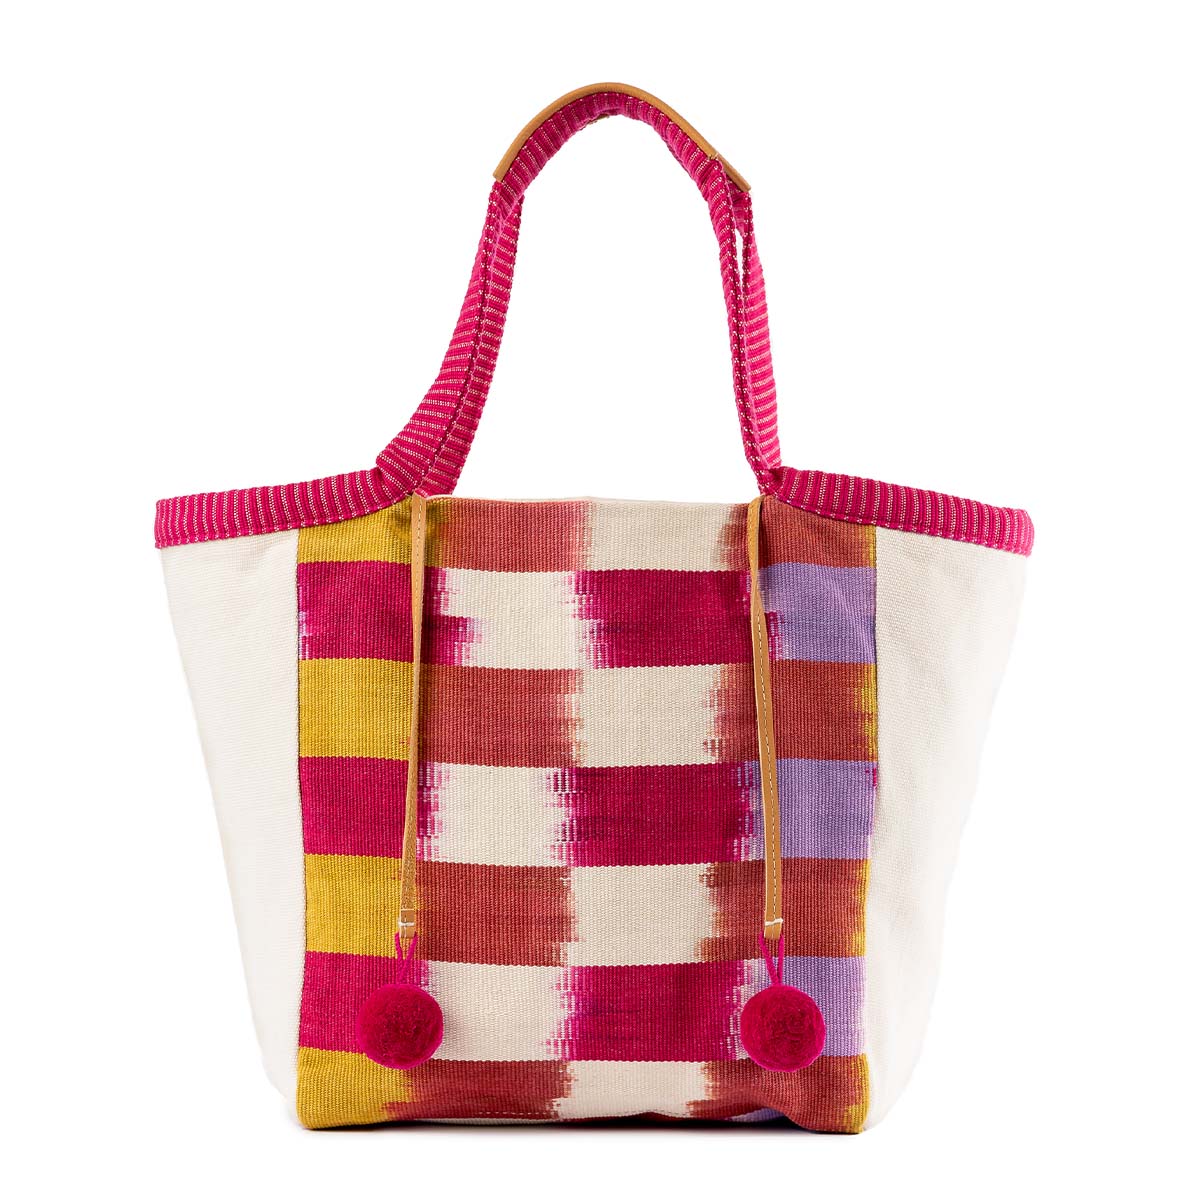 The front of the artisan hand woven Rosa Tote in Raspberry Paleta. It has a flame stitch red, orange, yellow, purple, and white stripes. It has two pink pompoms attached to leather cords.